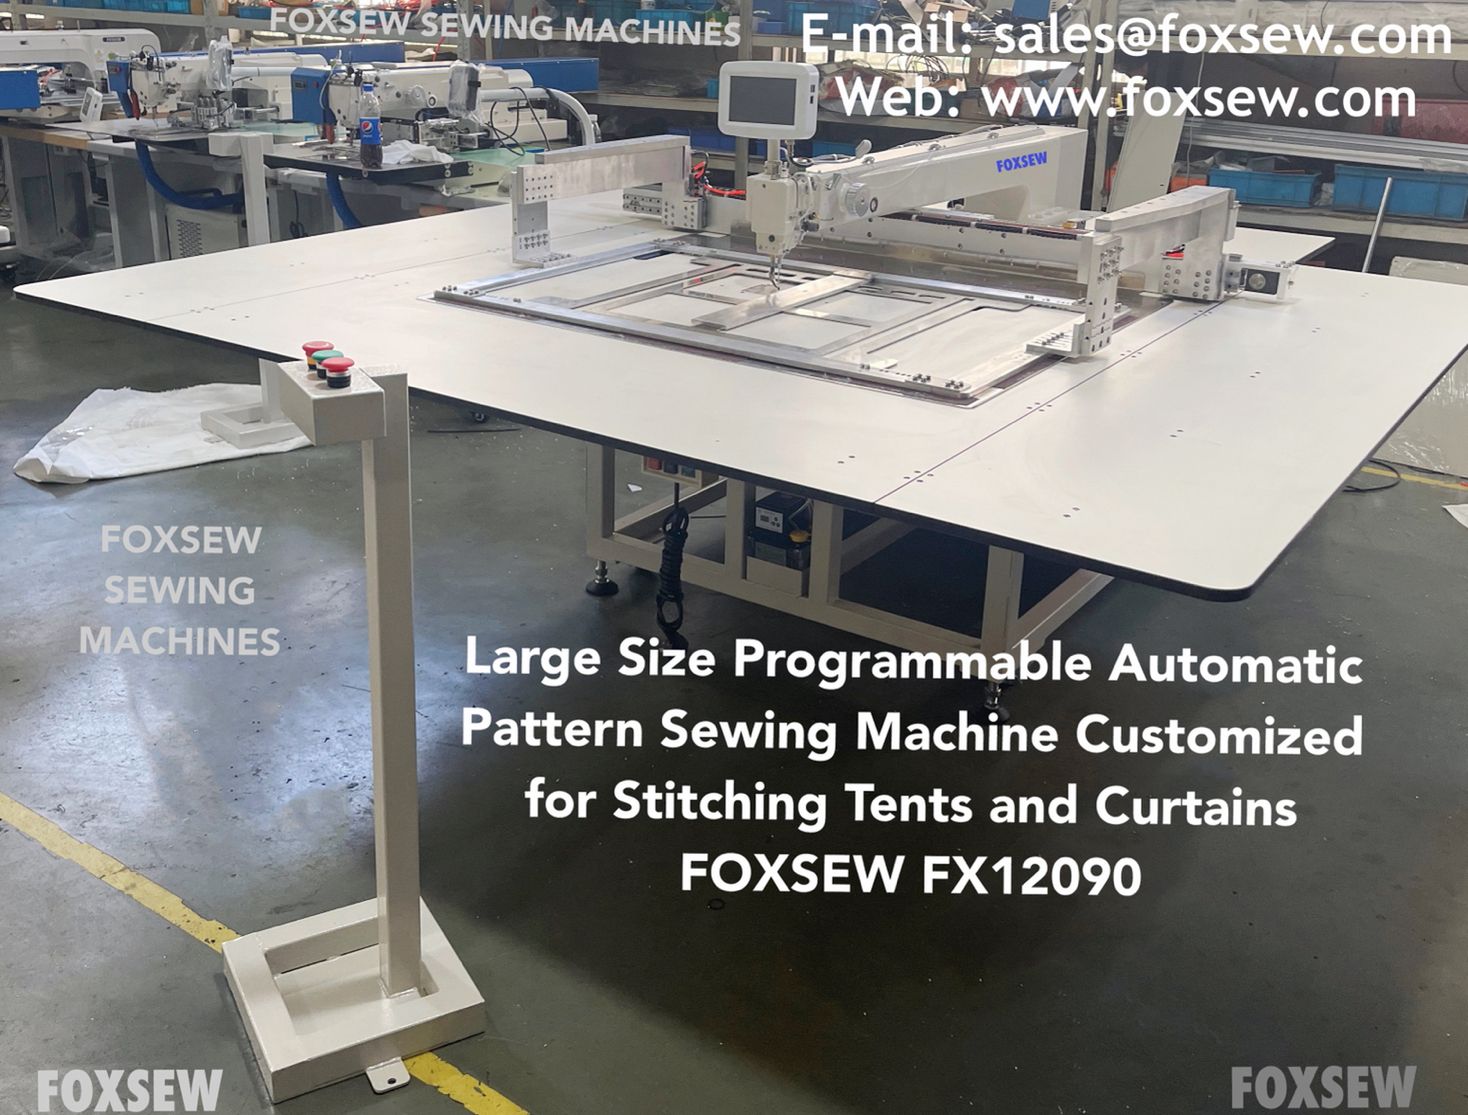 Large Size Programmable Automatic Pattern Sewing Machine Special Designed for Stitching Tents and Curtains FOXSEW FX12090 -4